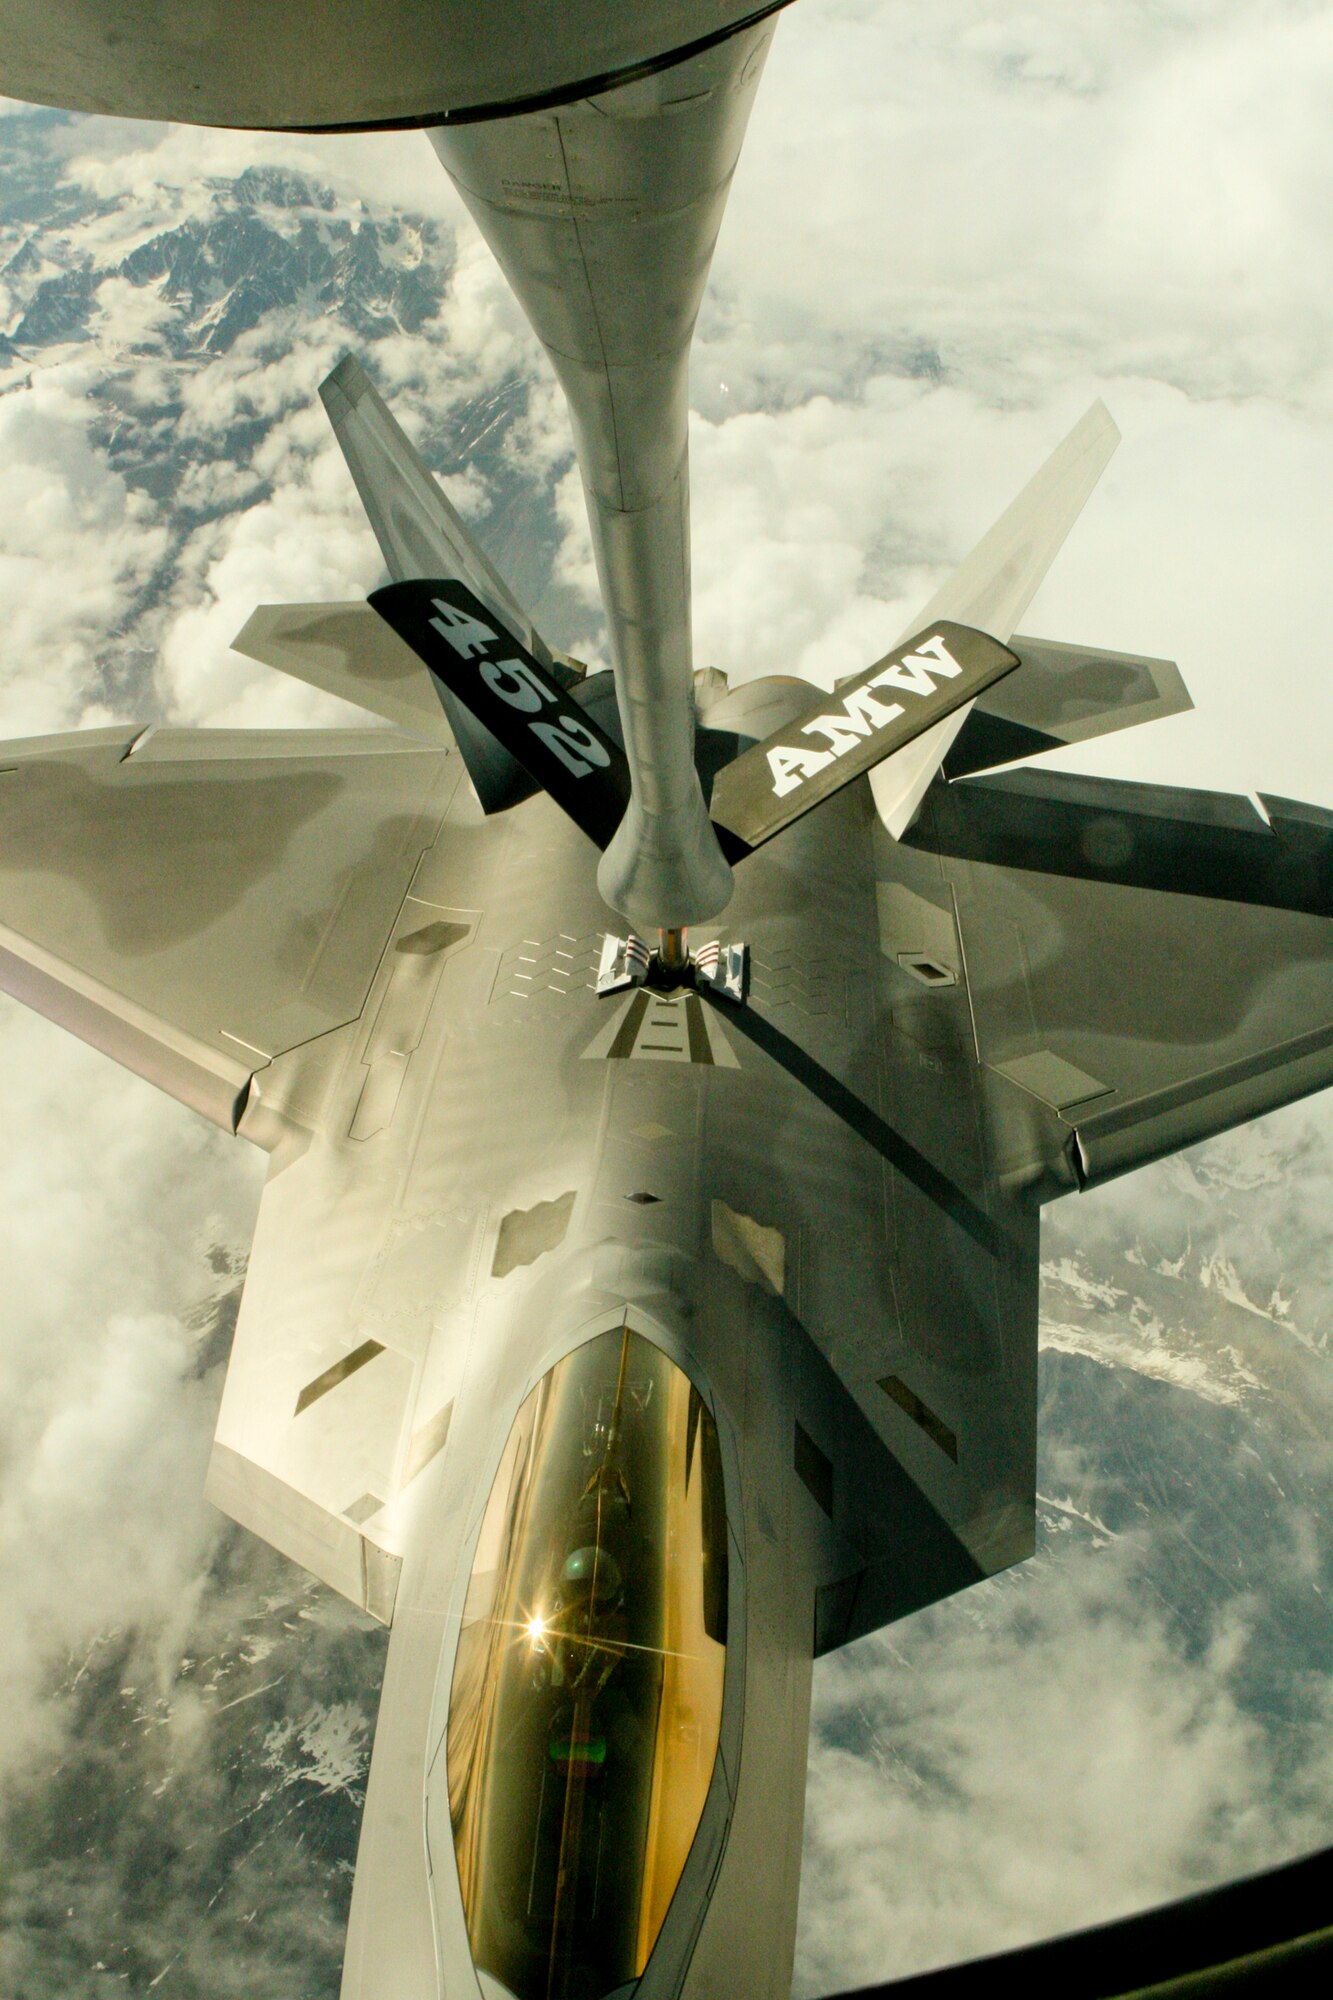 EIELSON AIR FORCE BASE, Alaska - An F-22 Raptor receives fuel from a KC-135 flown by pilots from the 168th Air Refueling Squadron stationed at Eielson Air Force Base during an aerial refueling mission June 19.. The mission was part of Exercise Northern Edge 2009, which prepares joint forces to respond to crises in the Asian Pacific region. During the mission, both F-22 and F-15 fighter jets received fuel. (United States Marine Corps photo by Lance Cpl. Ryan A. Rholes) 